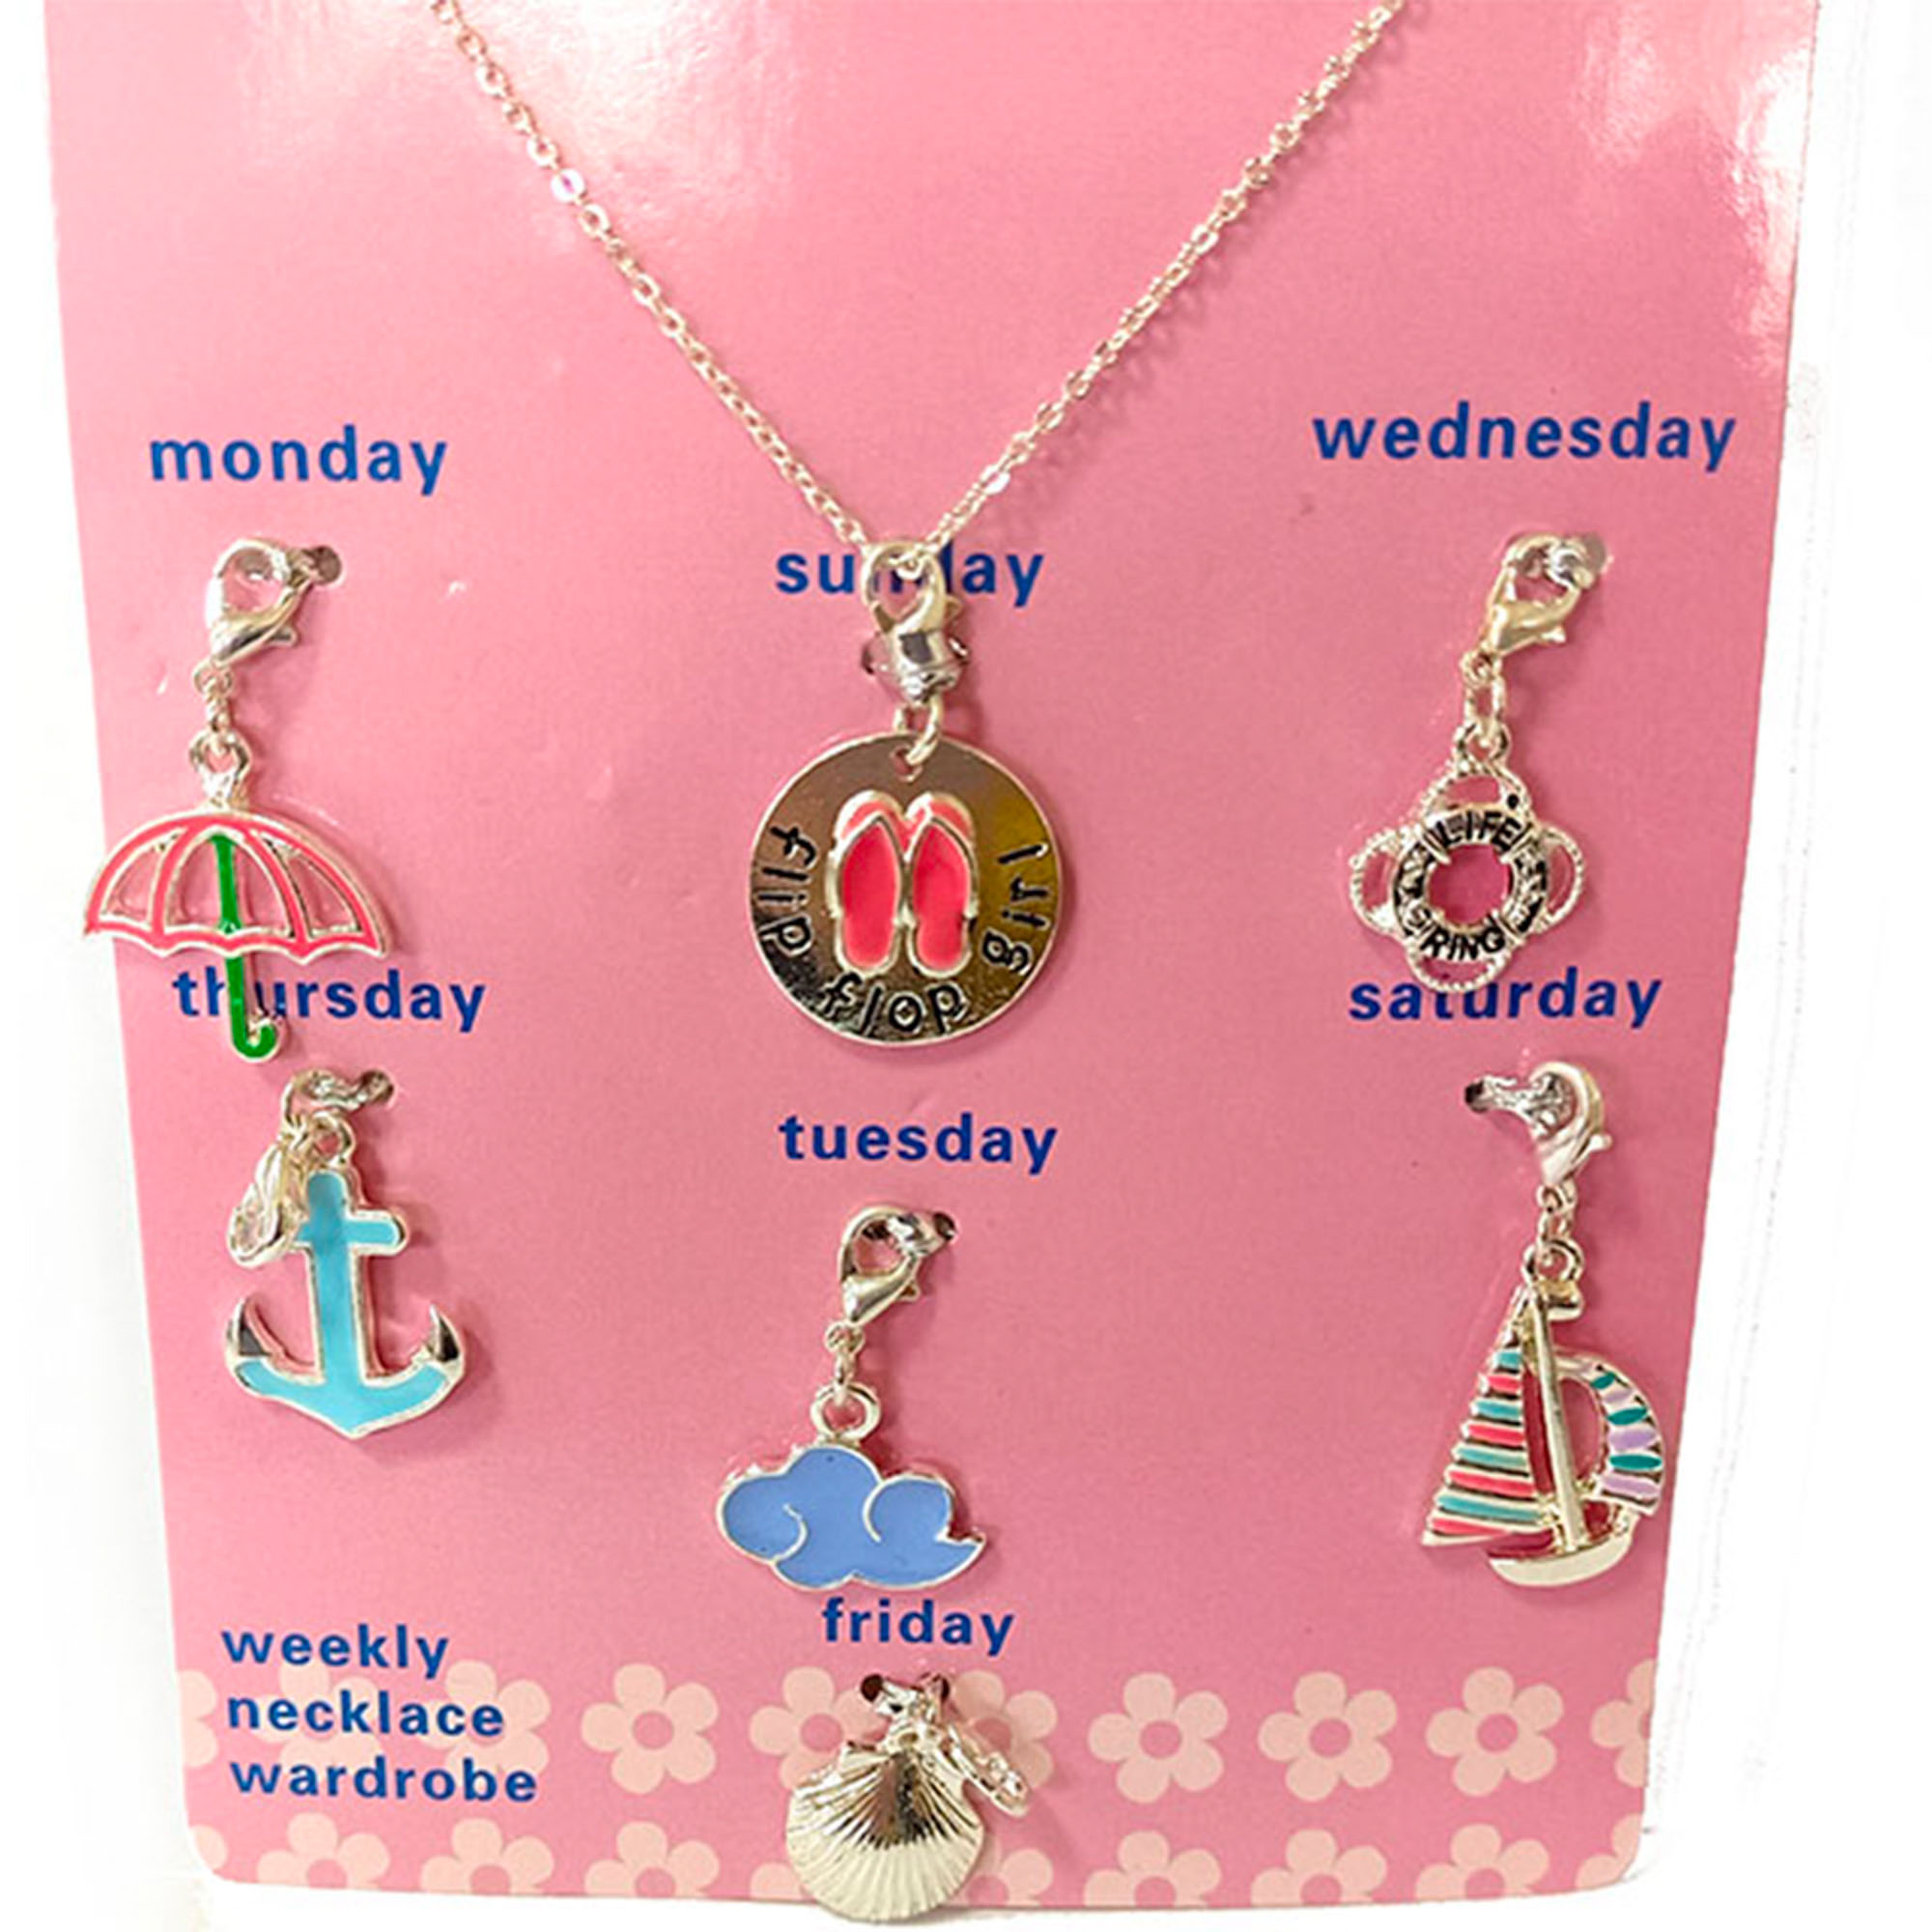 FOR KIDS WEEKLY NECKLACE MULTI CHARM SET